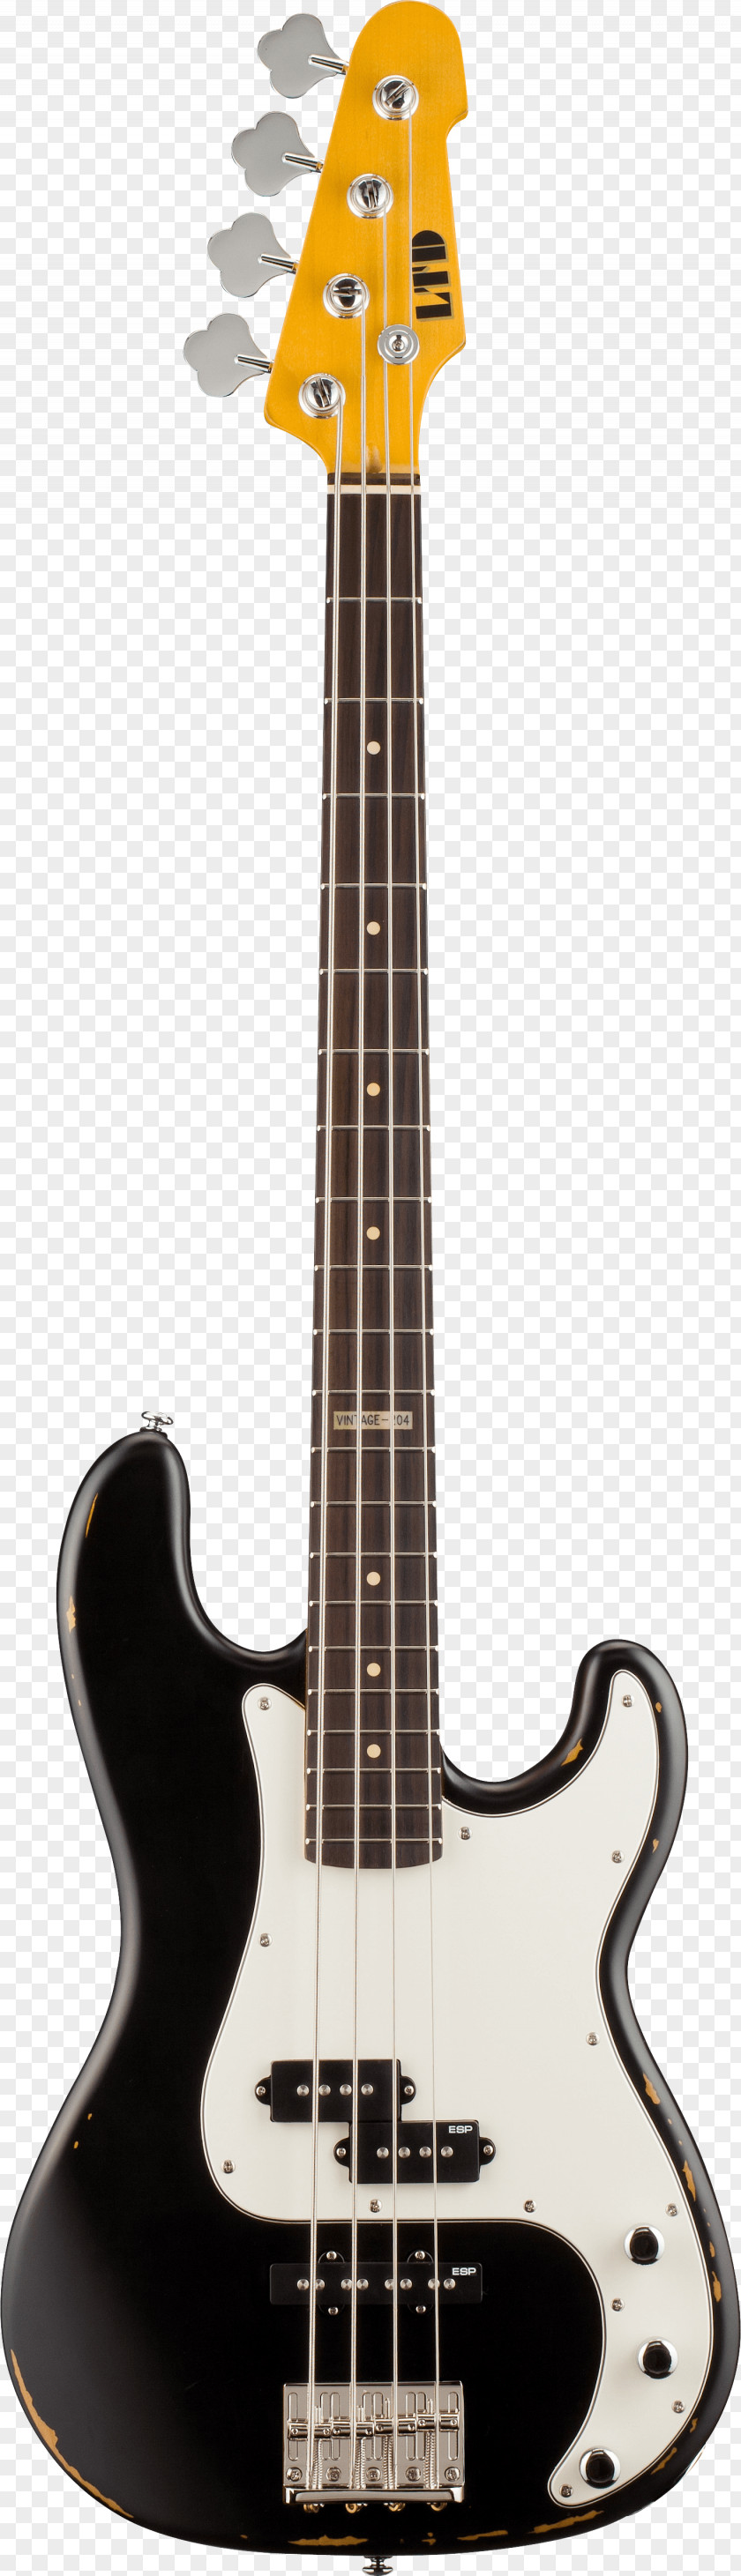 Bass Guitar Fender Precision Stratocaster Telecaster Mustang PNG